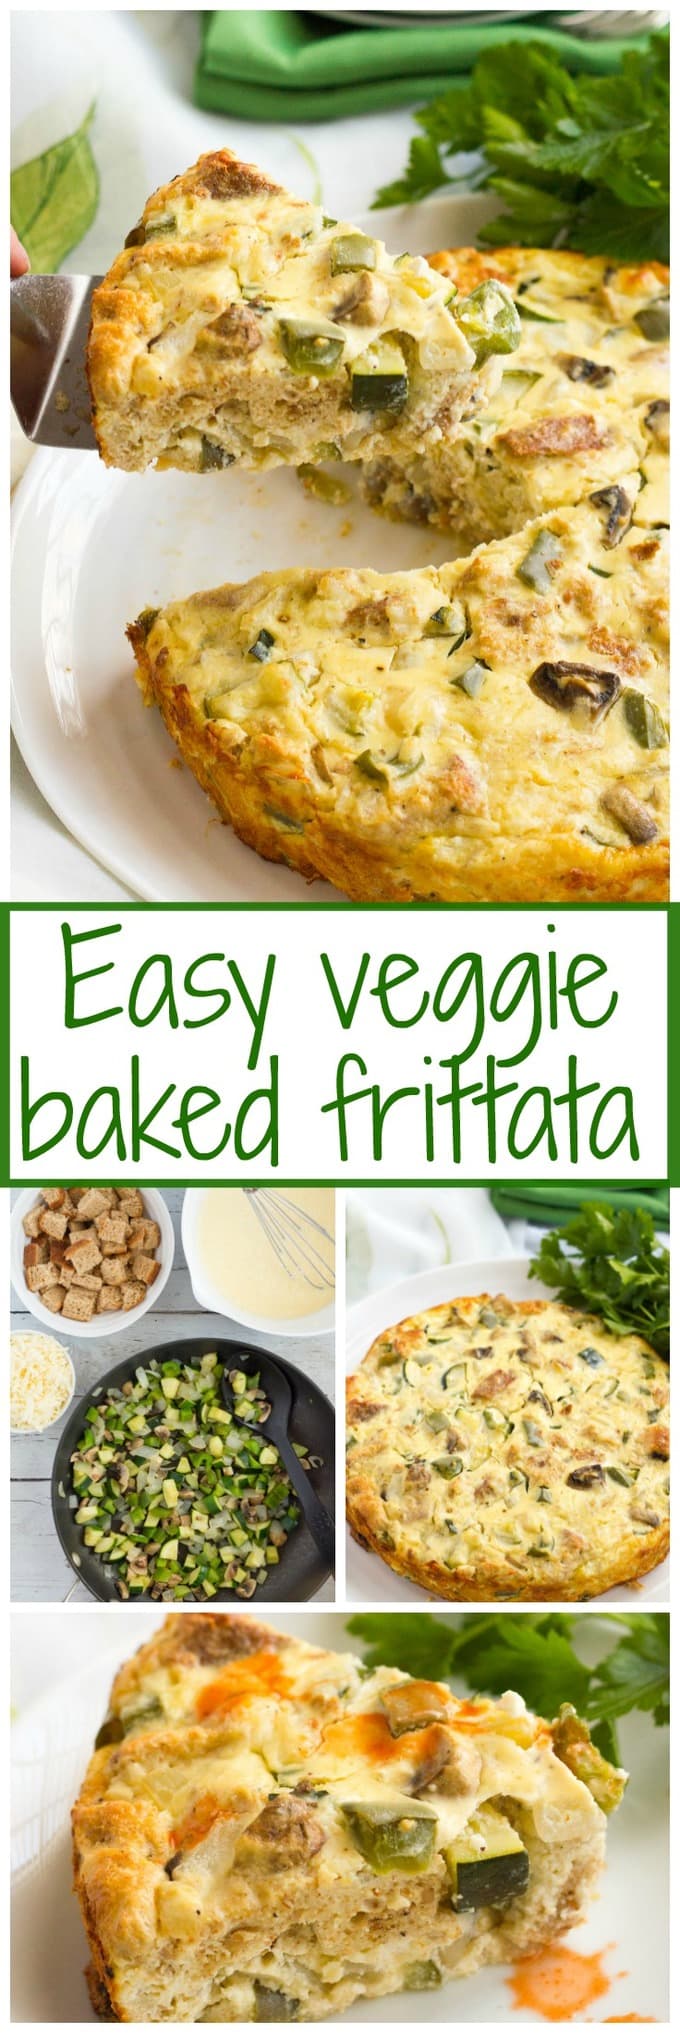 Vegetable frittata photo collage with a text box in the middle